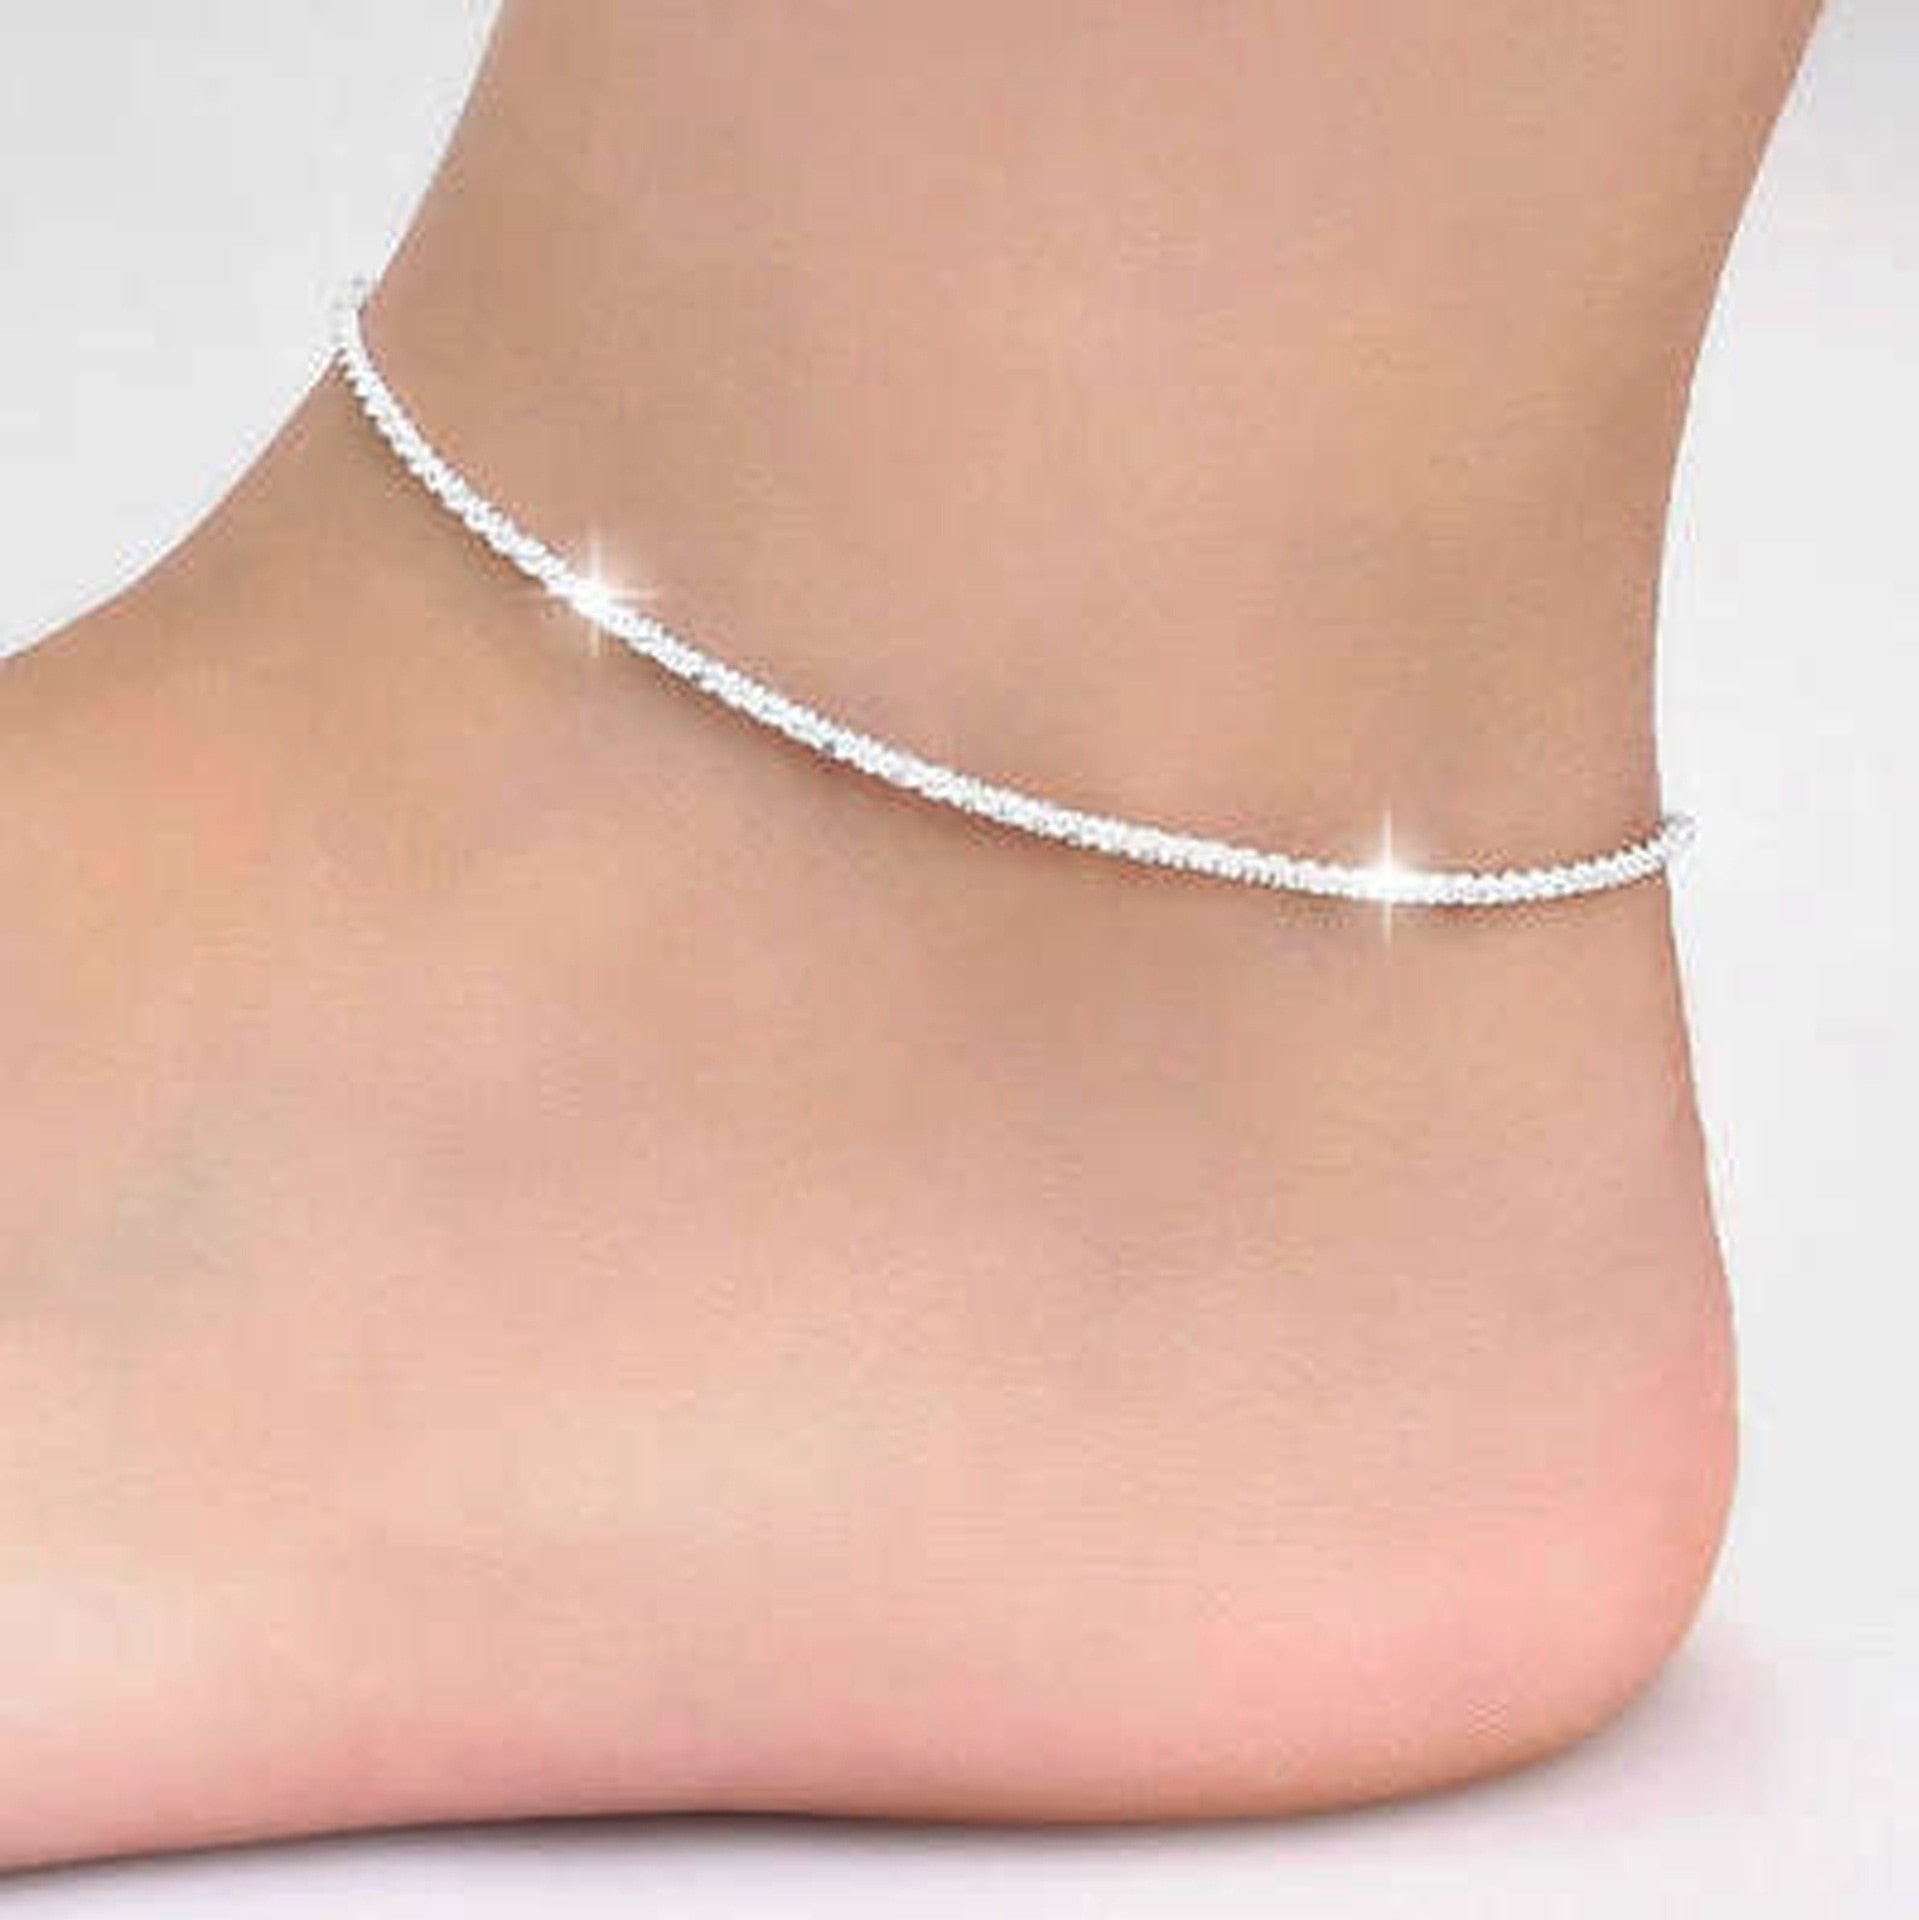 Thin stamped silver plated Shiny Chains Anklet For Women Girls Friend Foot Jewelry Leg Bracelet Barefoot Tobillera de Prata